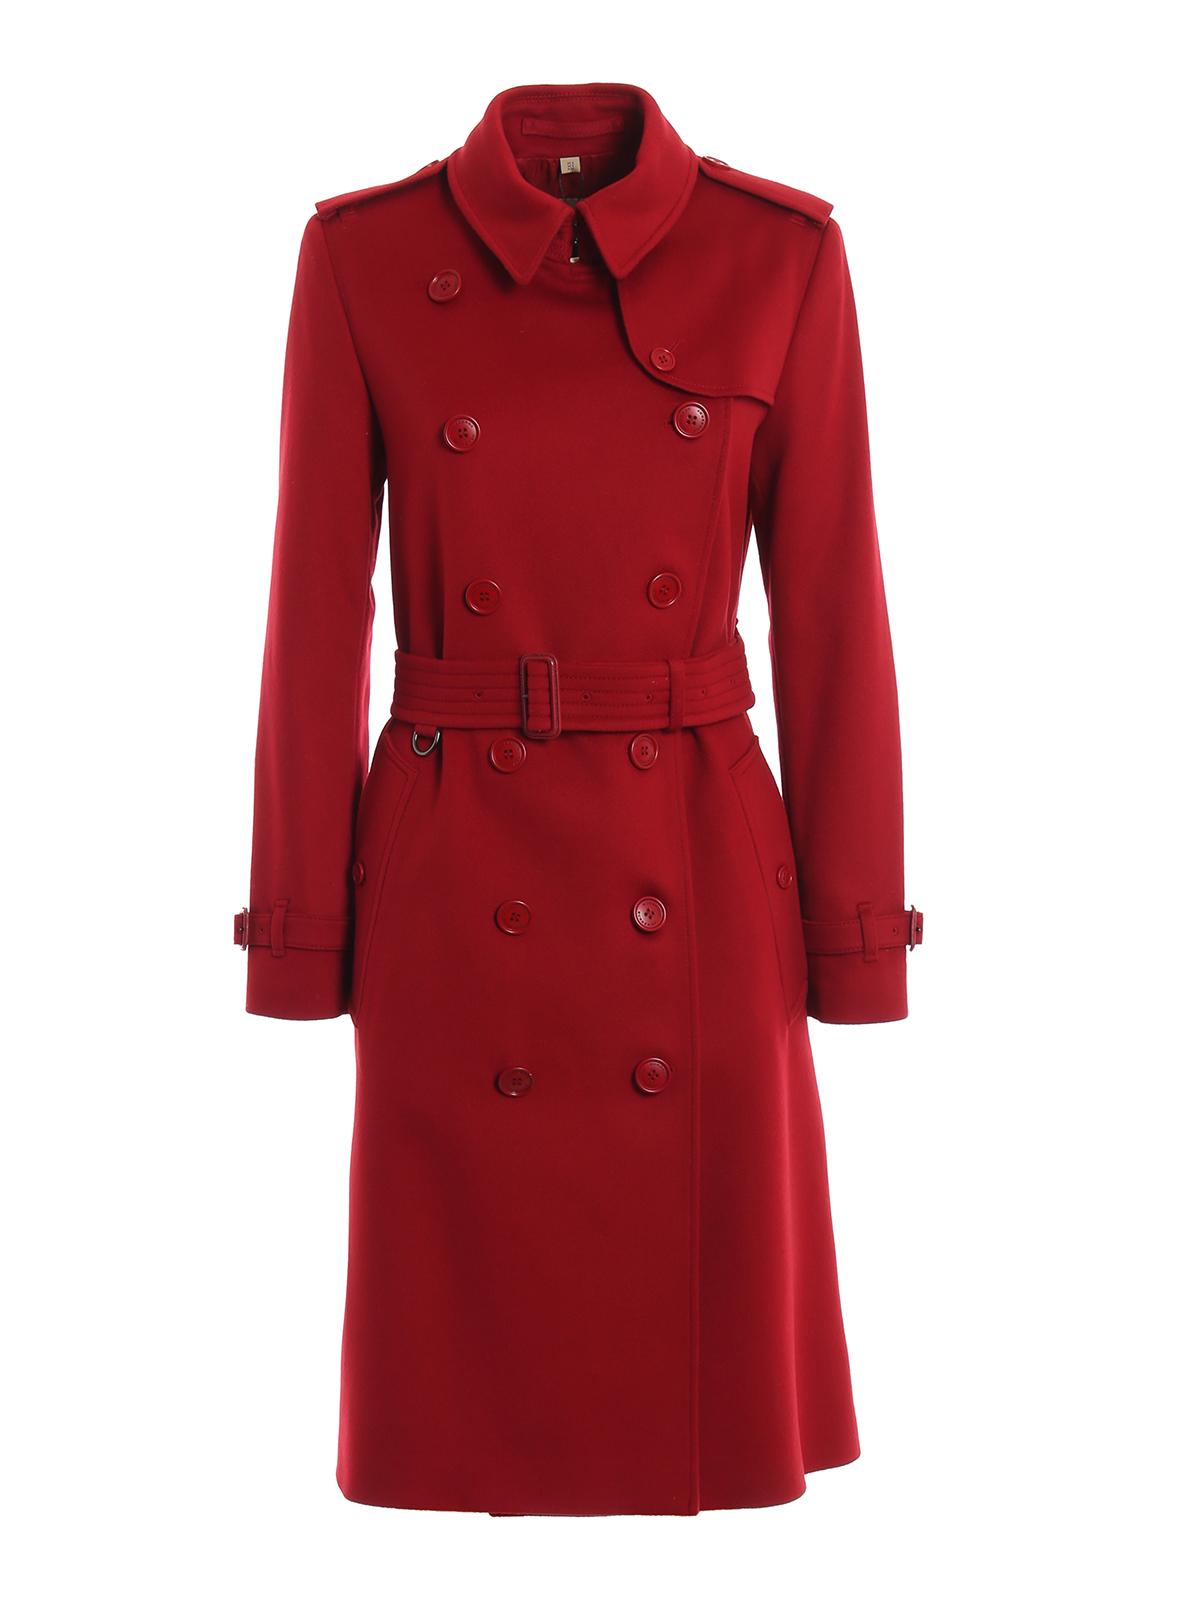 Burberry Kensington Red Cashmere Trench Coat - Lyst